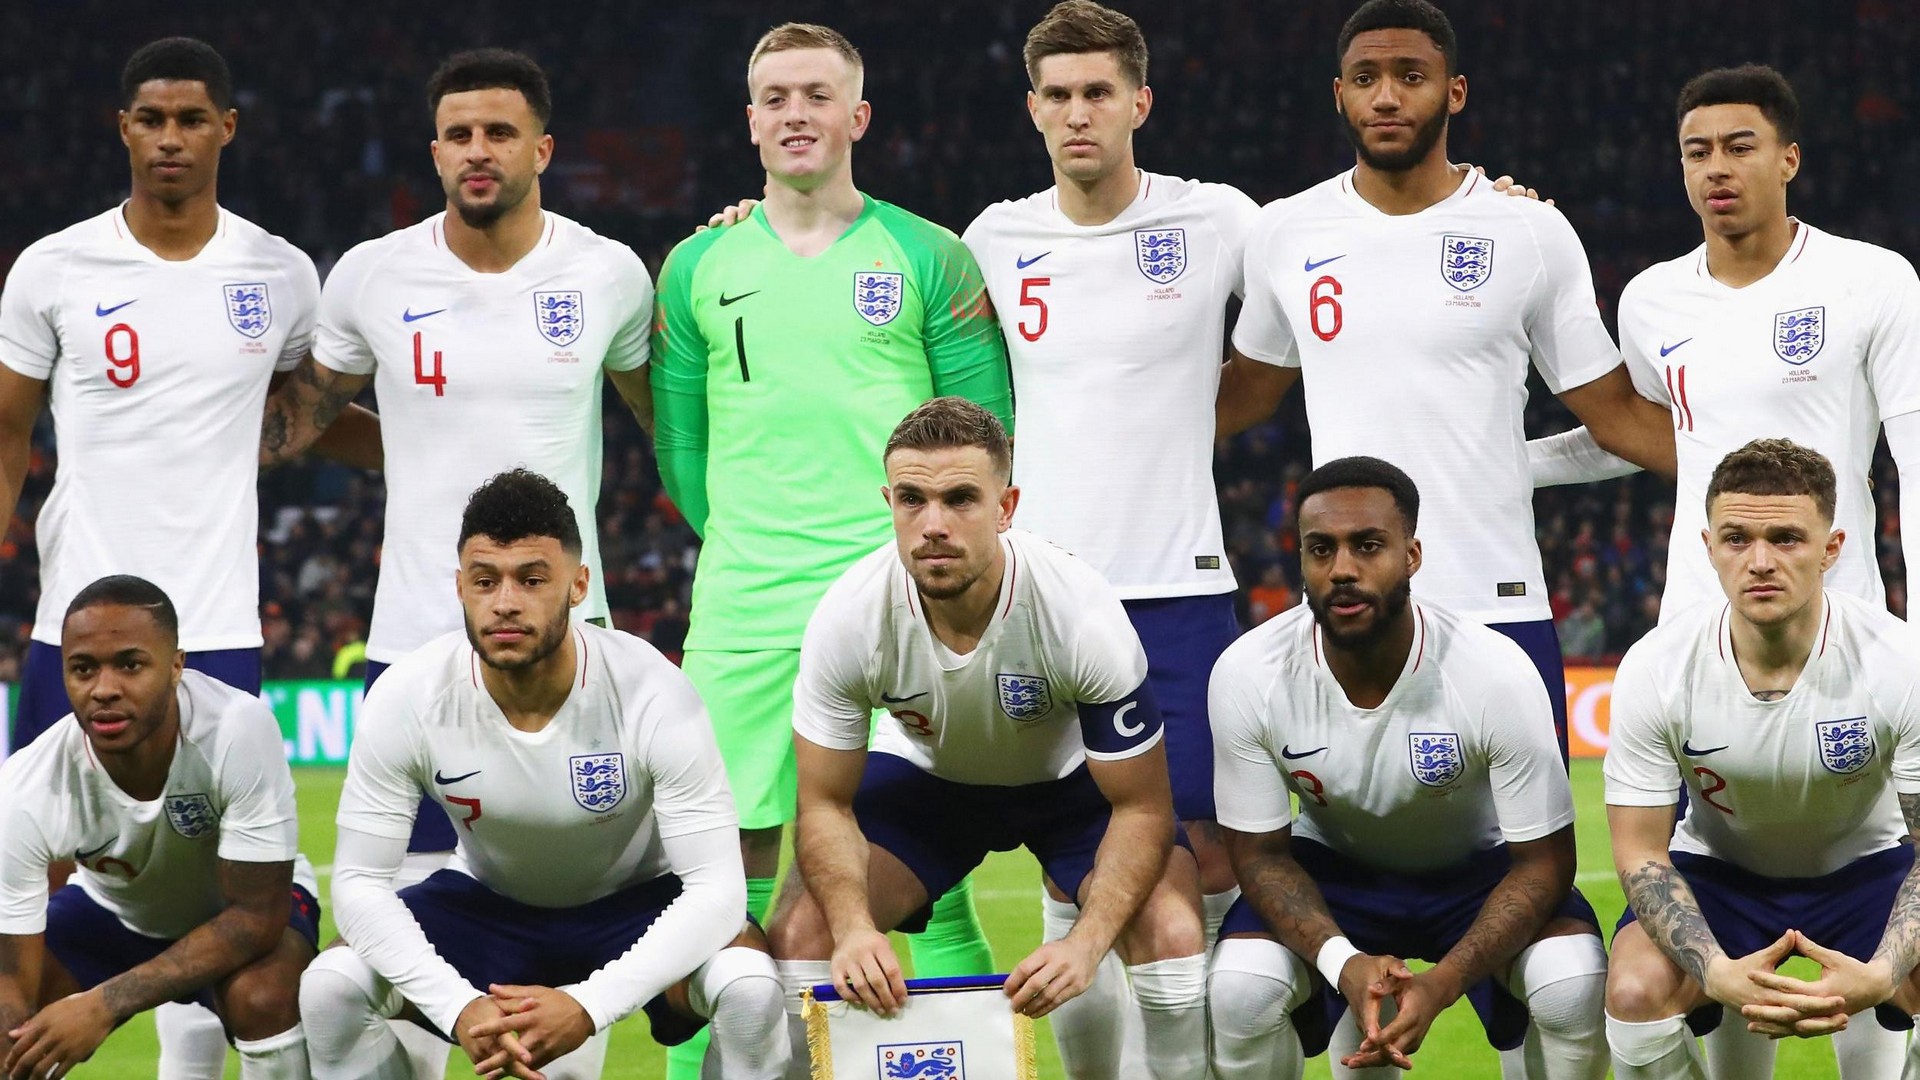 Wallpaper Desktop England National Team HD With Resolution 1920X1080 pixel. You can make this wallpaper for your Mac or Windows Desktop Background, iPhone, Android or Tablet and another Smartphone device for free